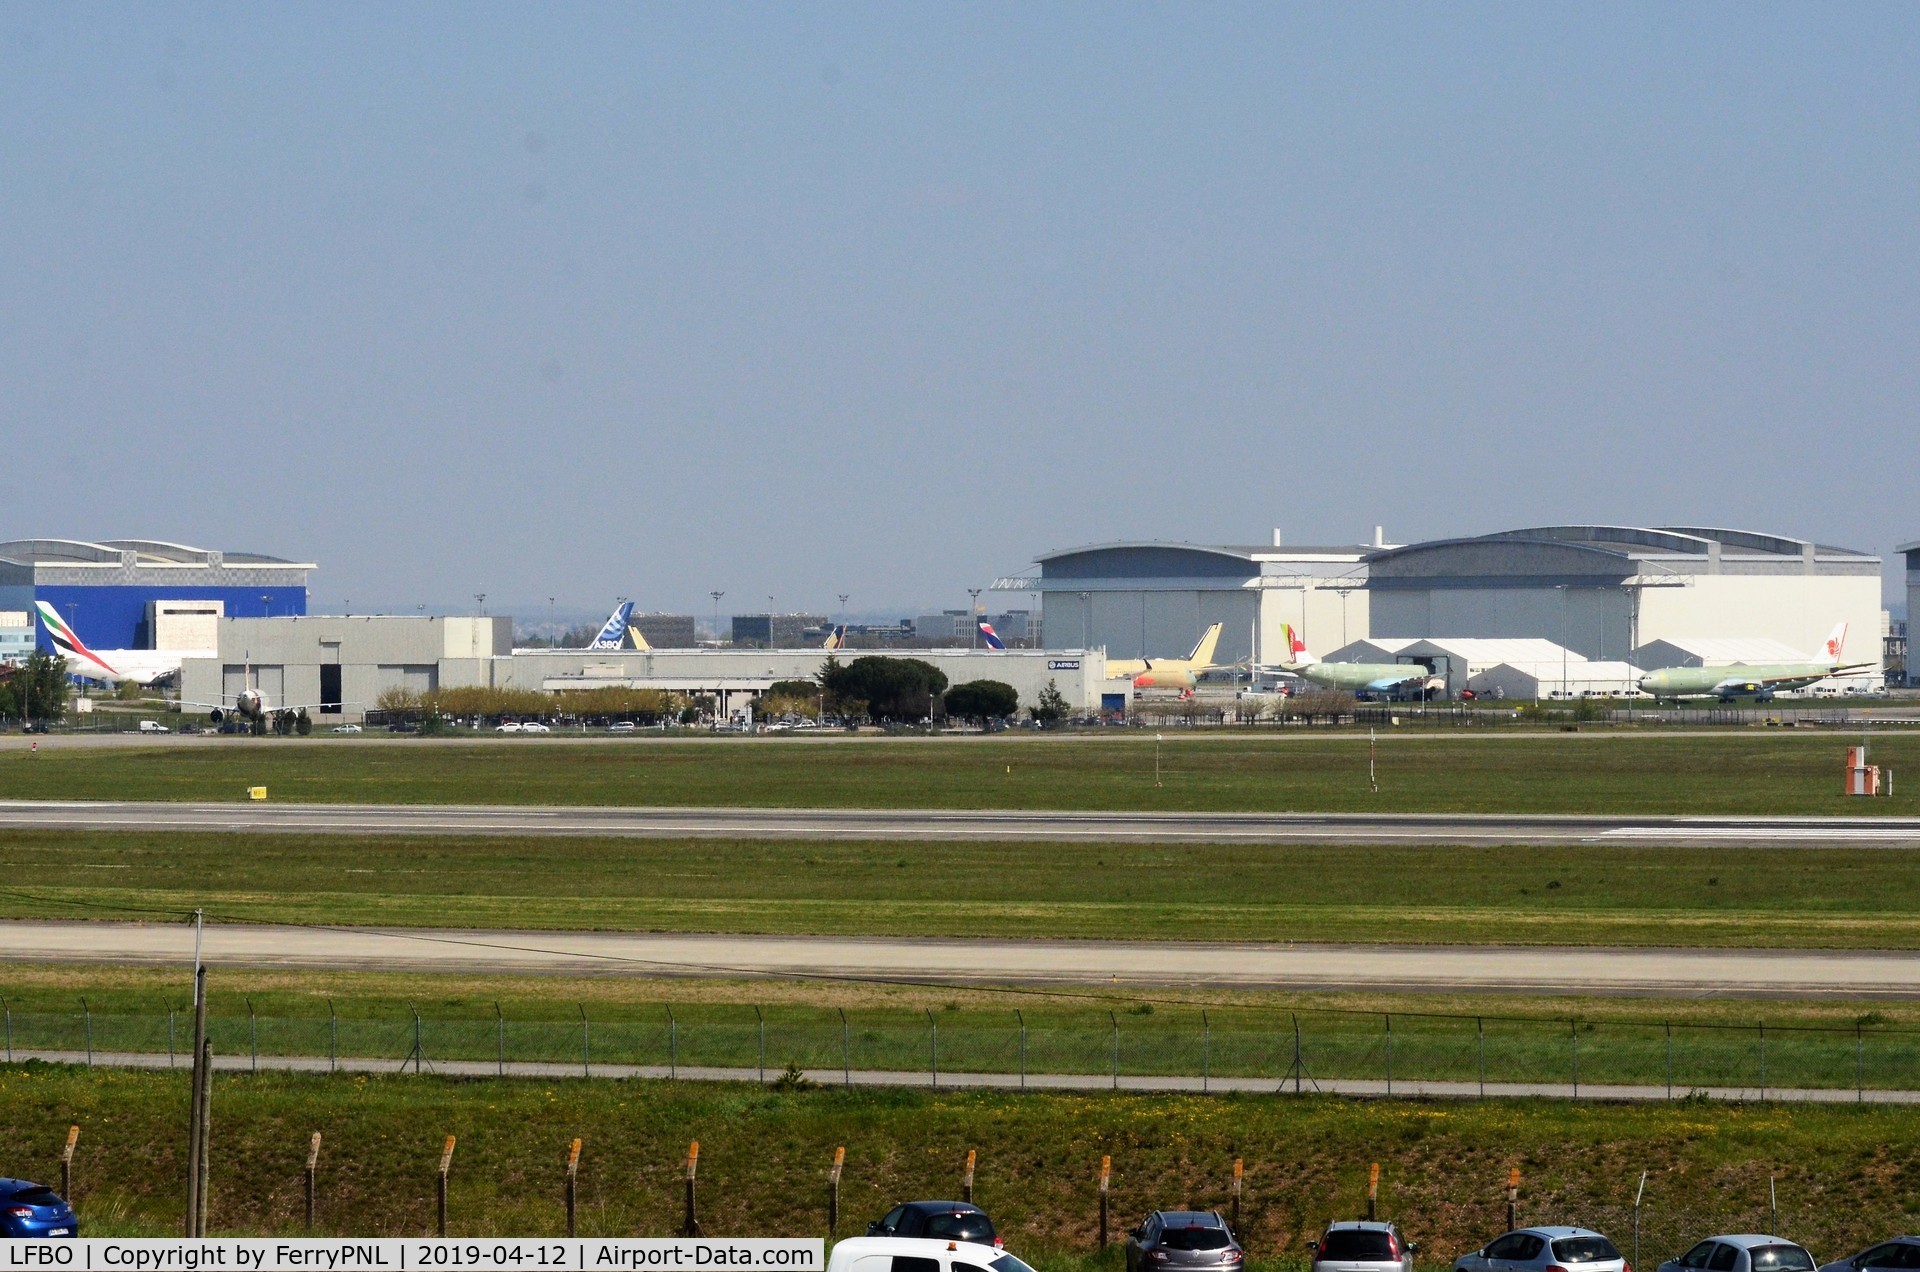 Toulouse Airport, Blagnac Airport France (LFBO) - The A380 and soon A350 production area in TLS